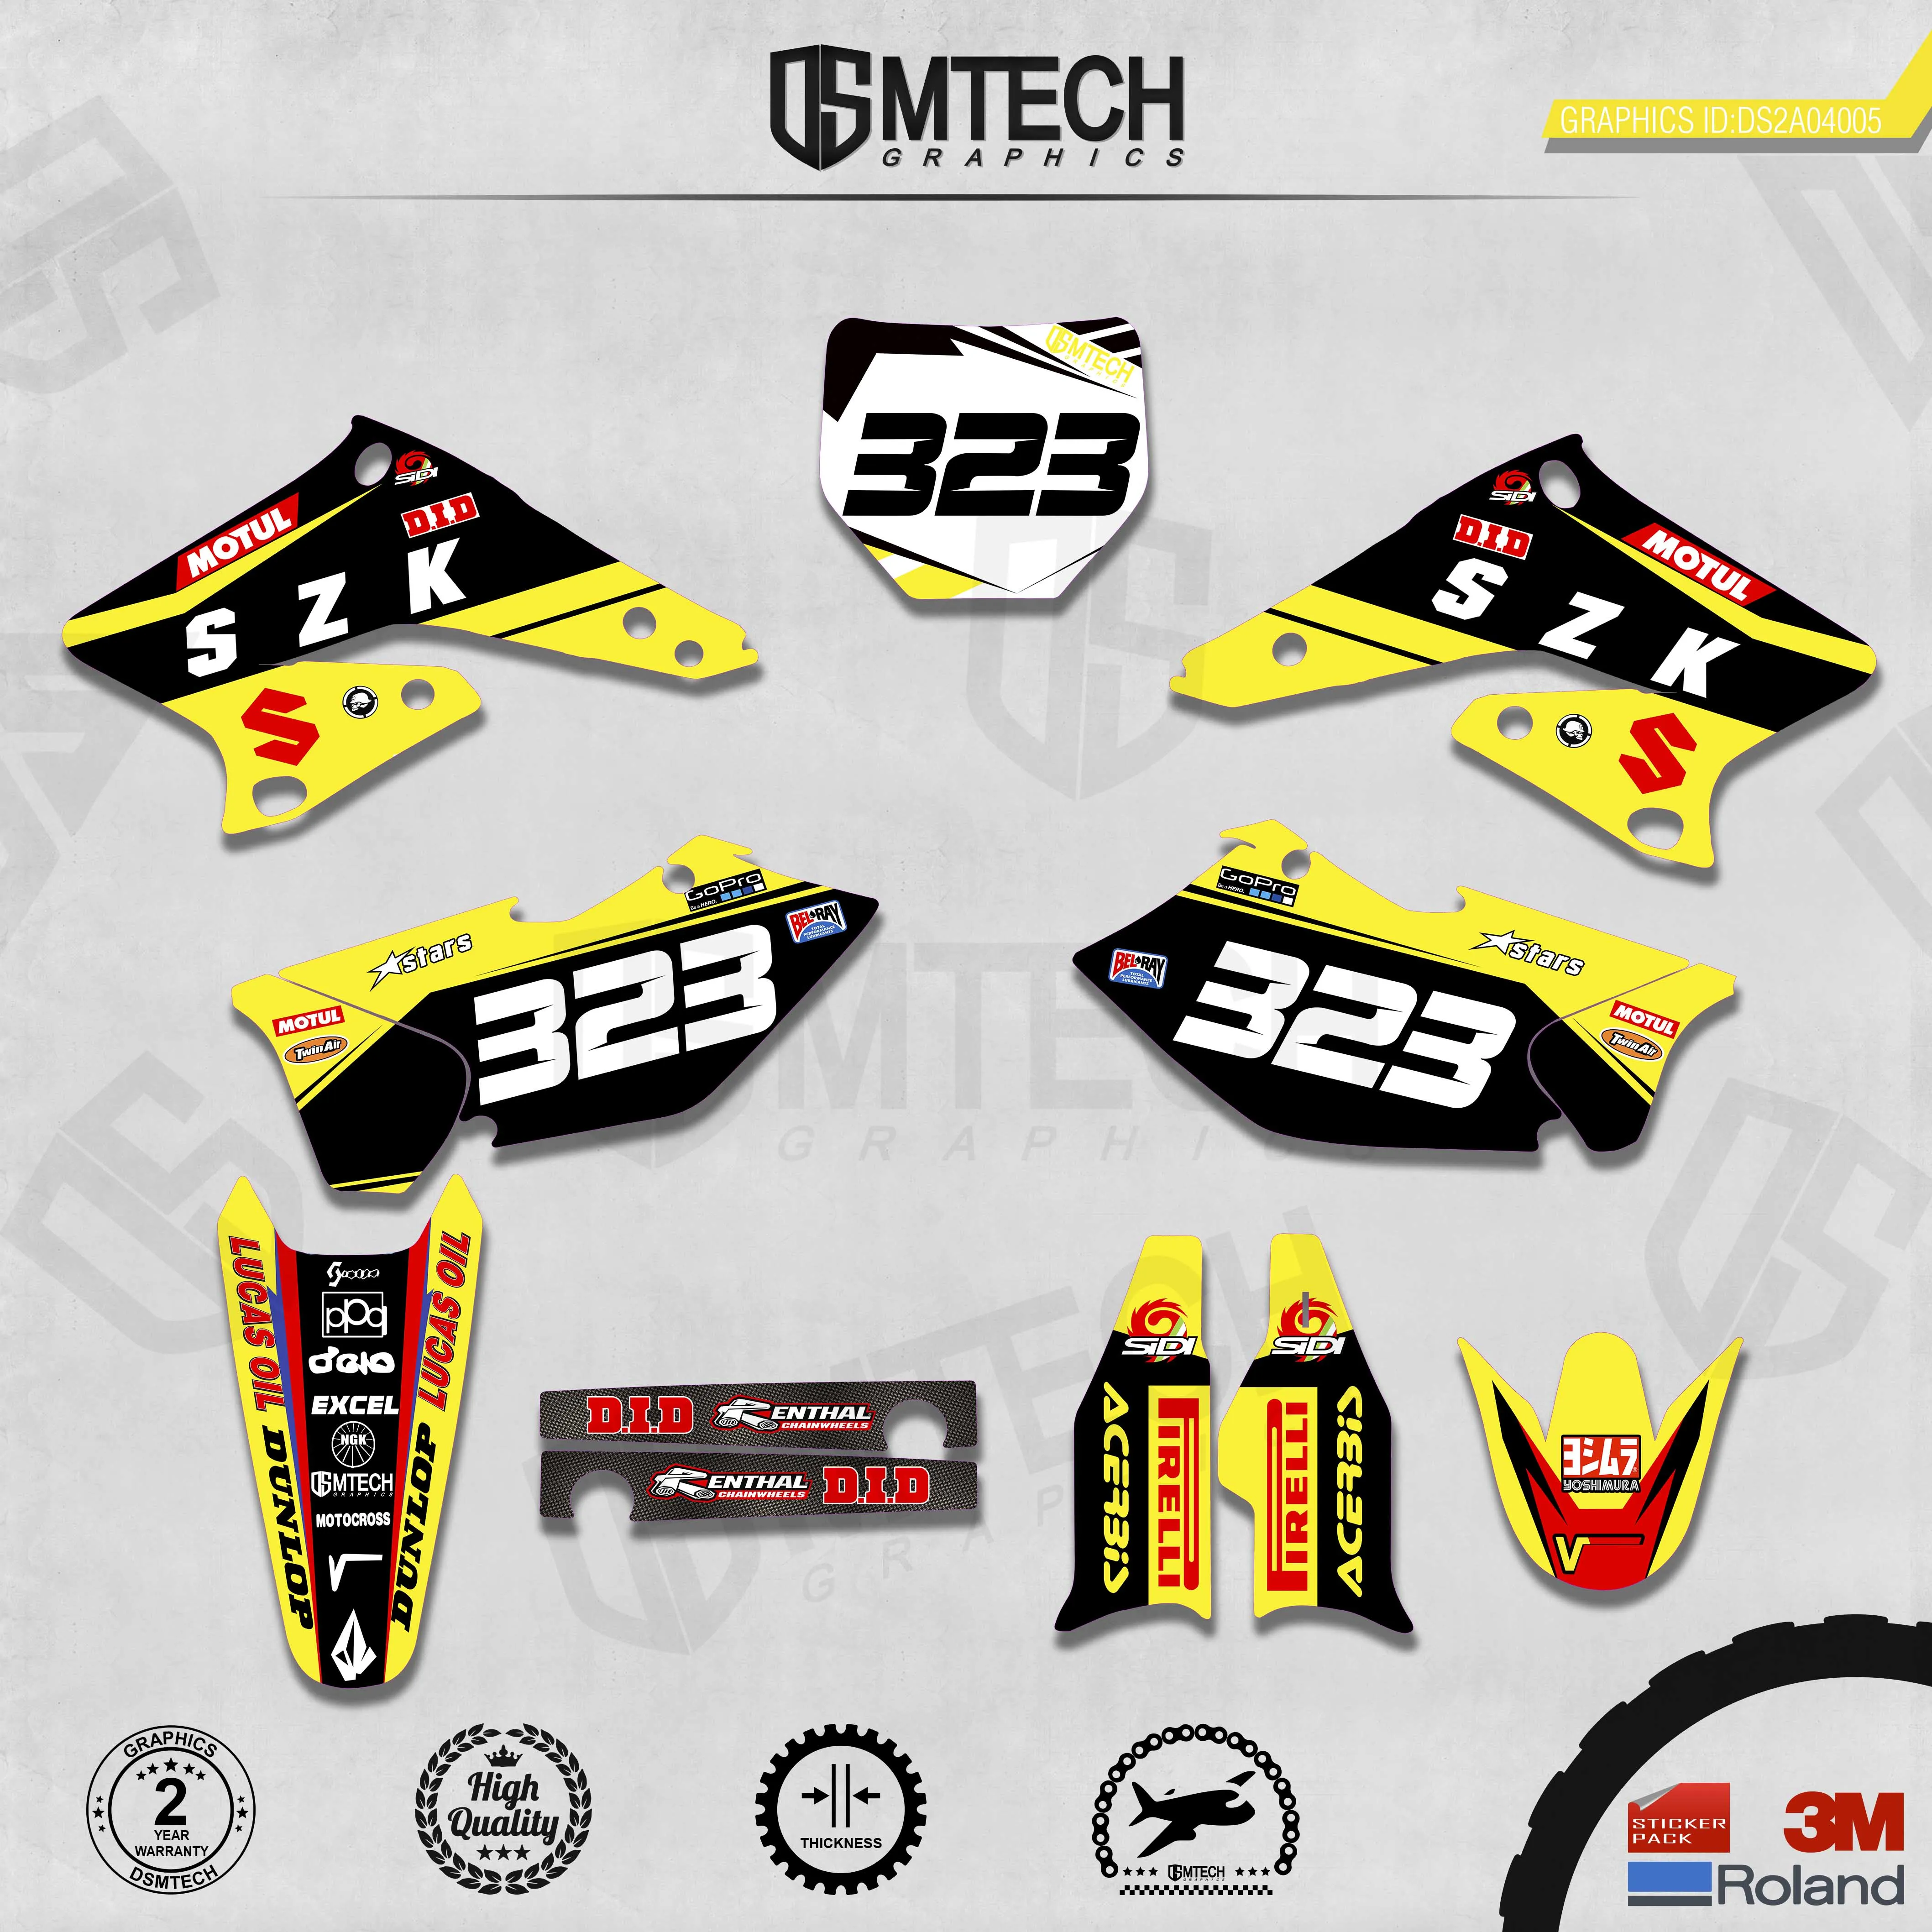 DSMTECH Customized Team Graphics Backgrounds Decals 3M Custom Stickers For 2004-2006 RMZ250  005